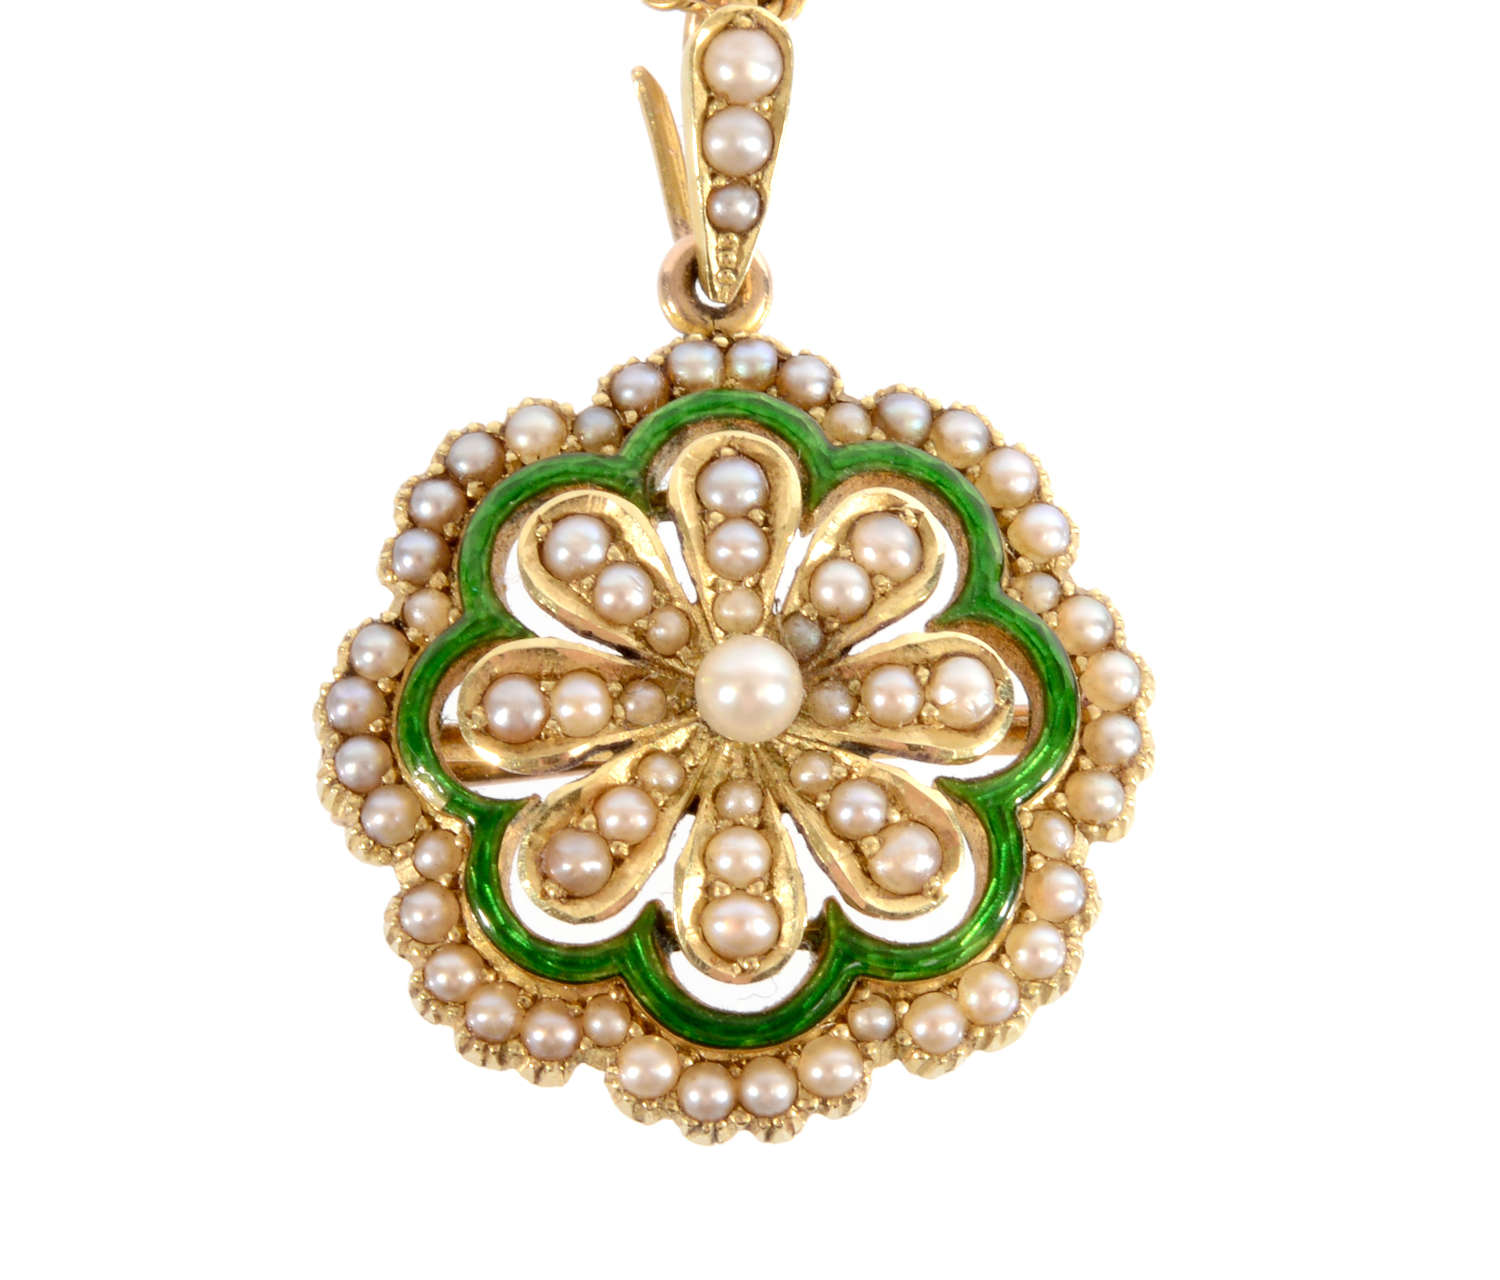 An Edwardian 15ct Gold, Enamel and Seed-Pearl Pendant/Brooch